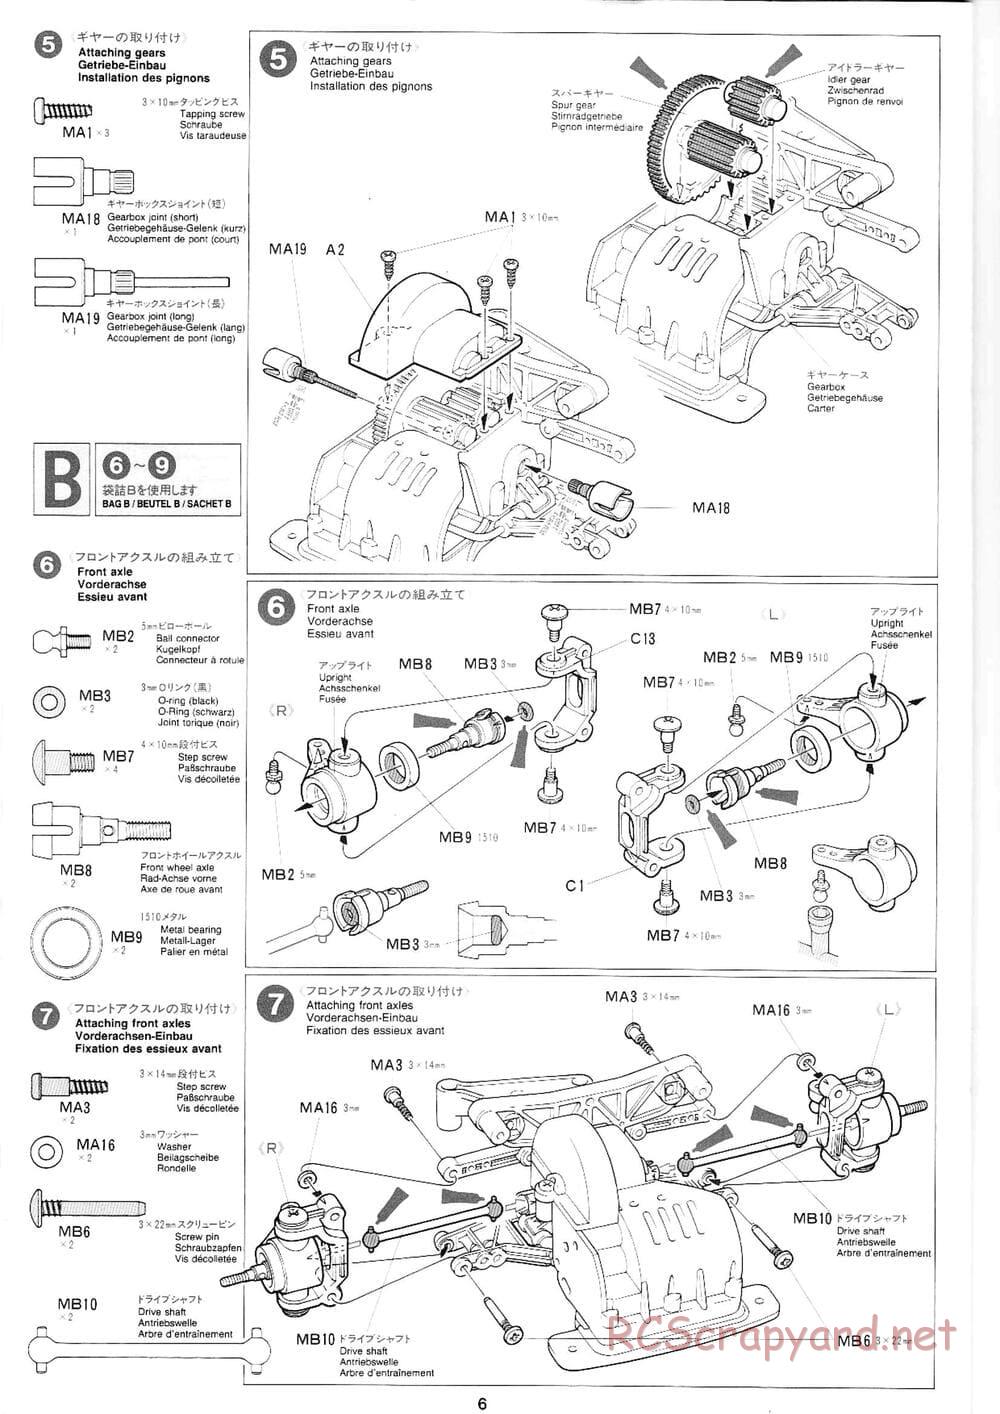 Tamiya - Volkswagen New Beetle - FF-01 Chassis - Manual - Page 4